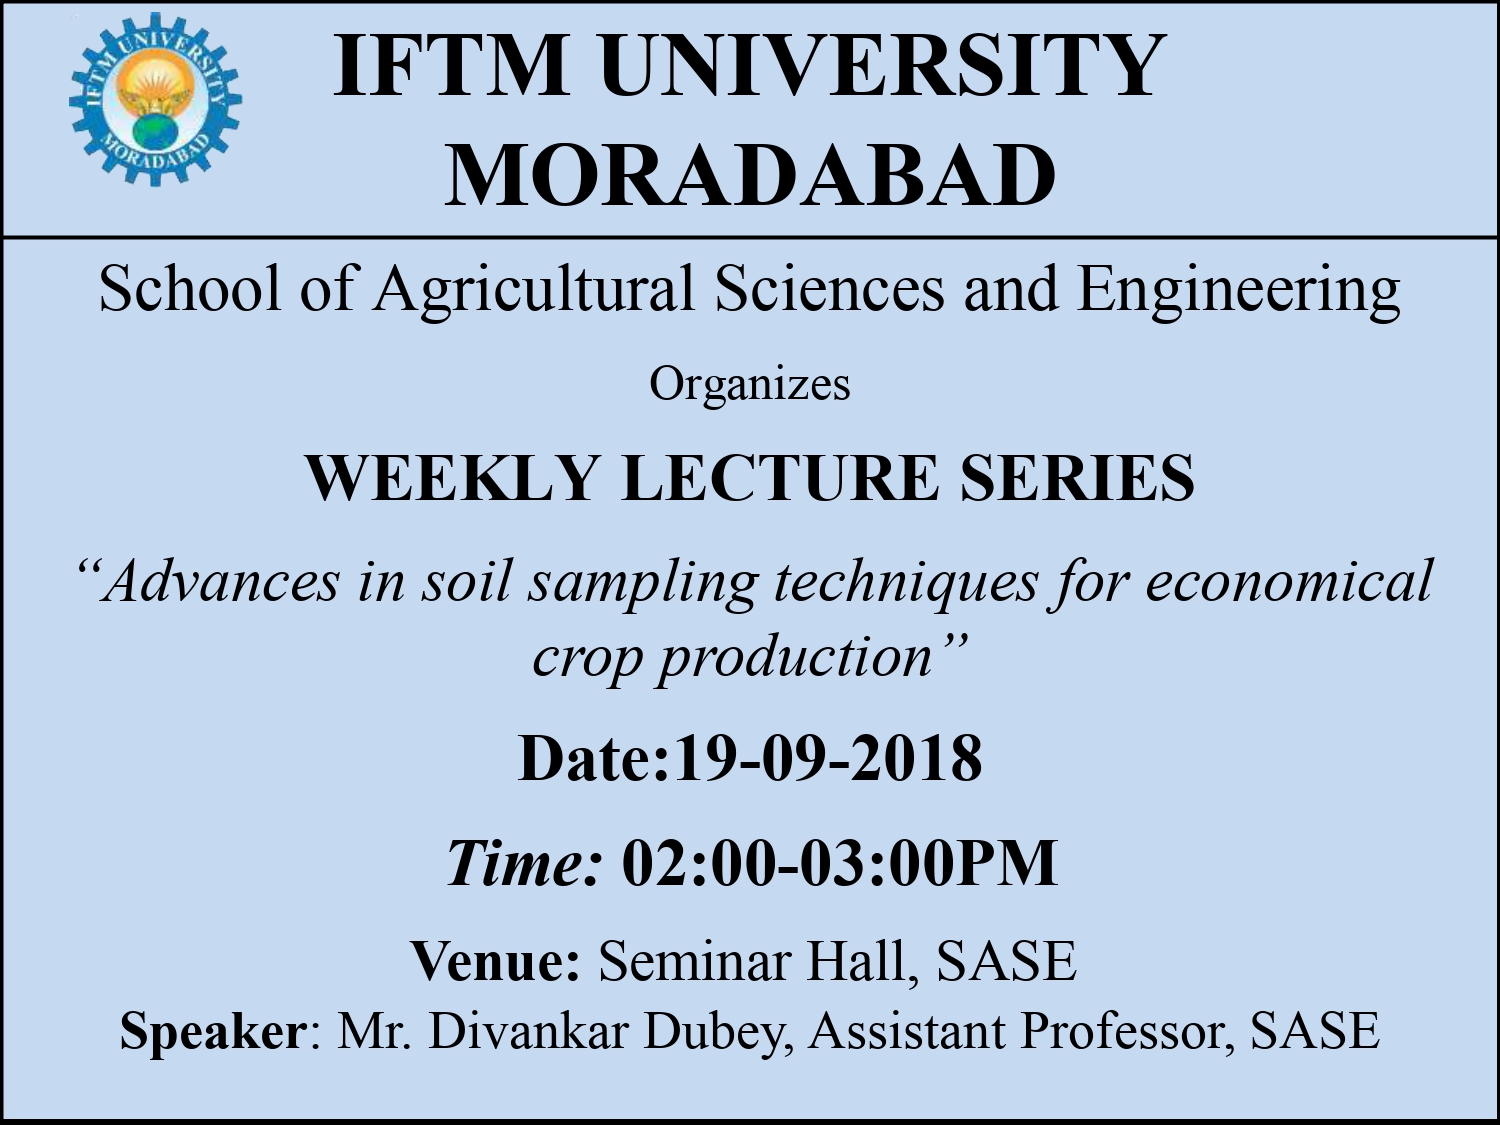 Weekly Lecture Series: “Advances in soil sampling techniques for economical crop production”